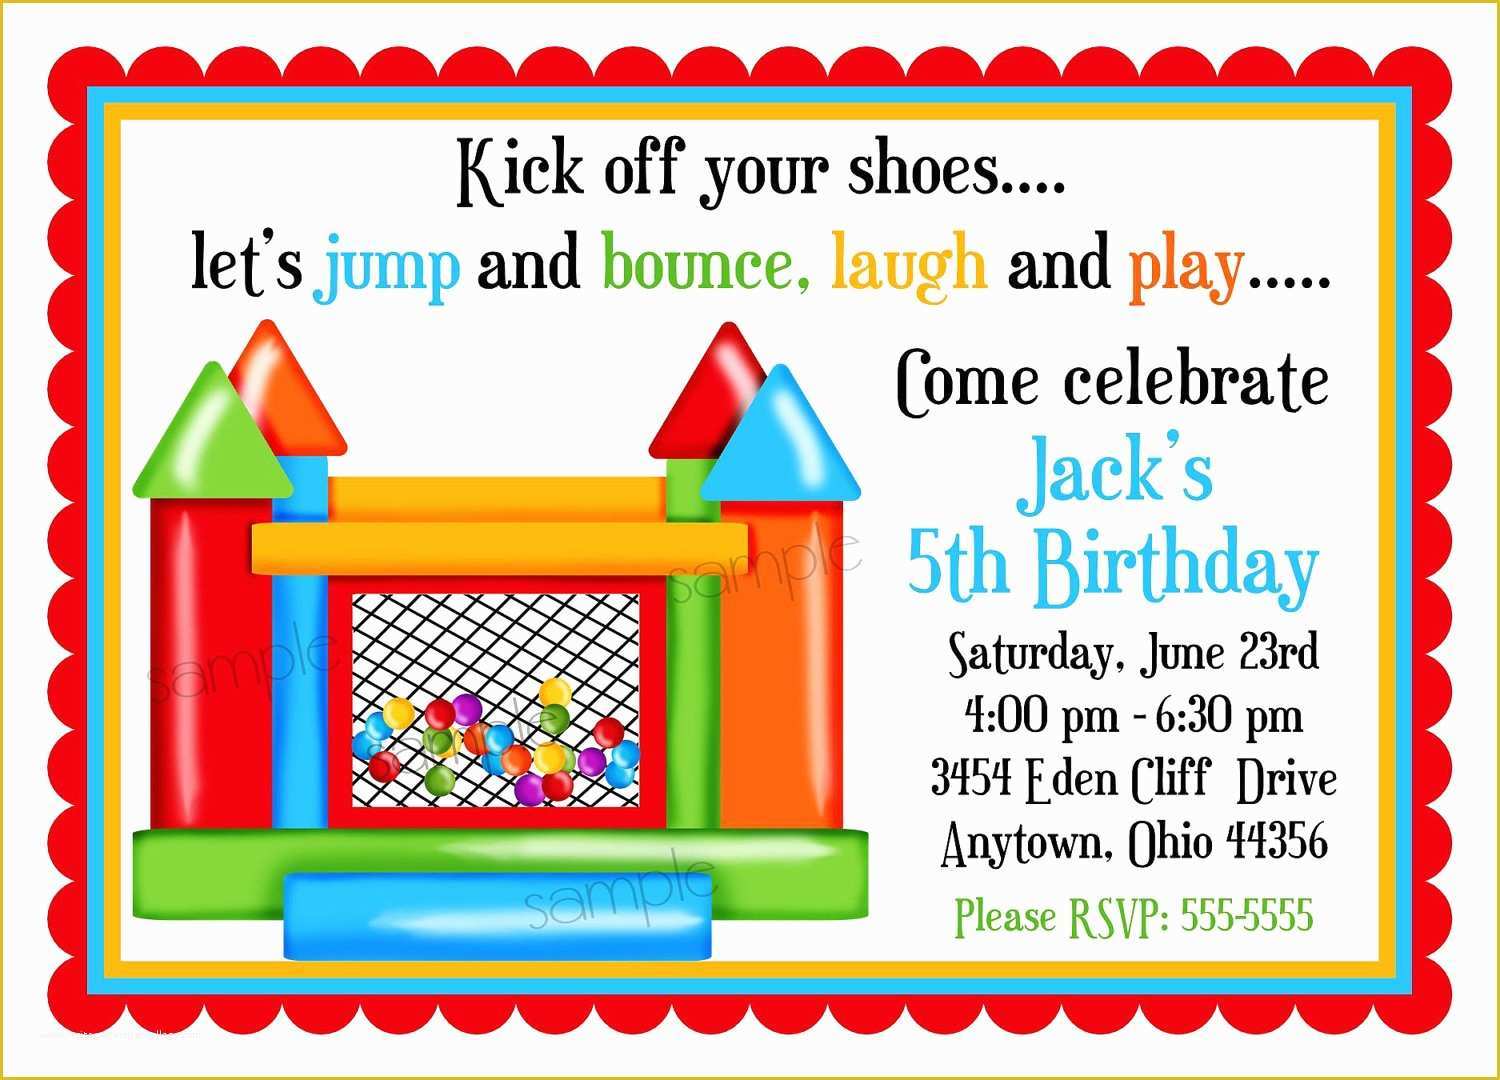 Free Bounce Party Invitation Template Of House Party Invites Invitation Ideas Free Bounce Party